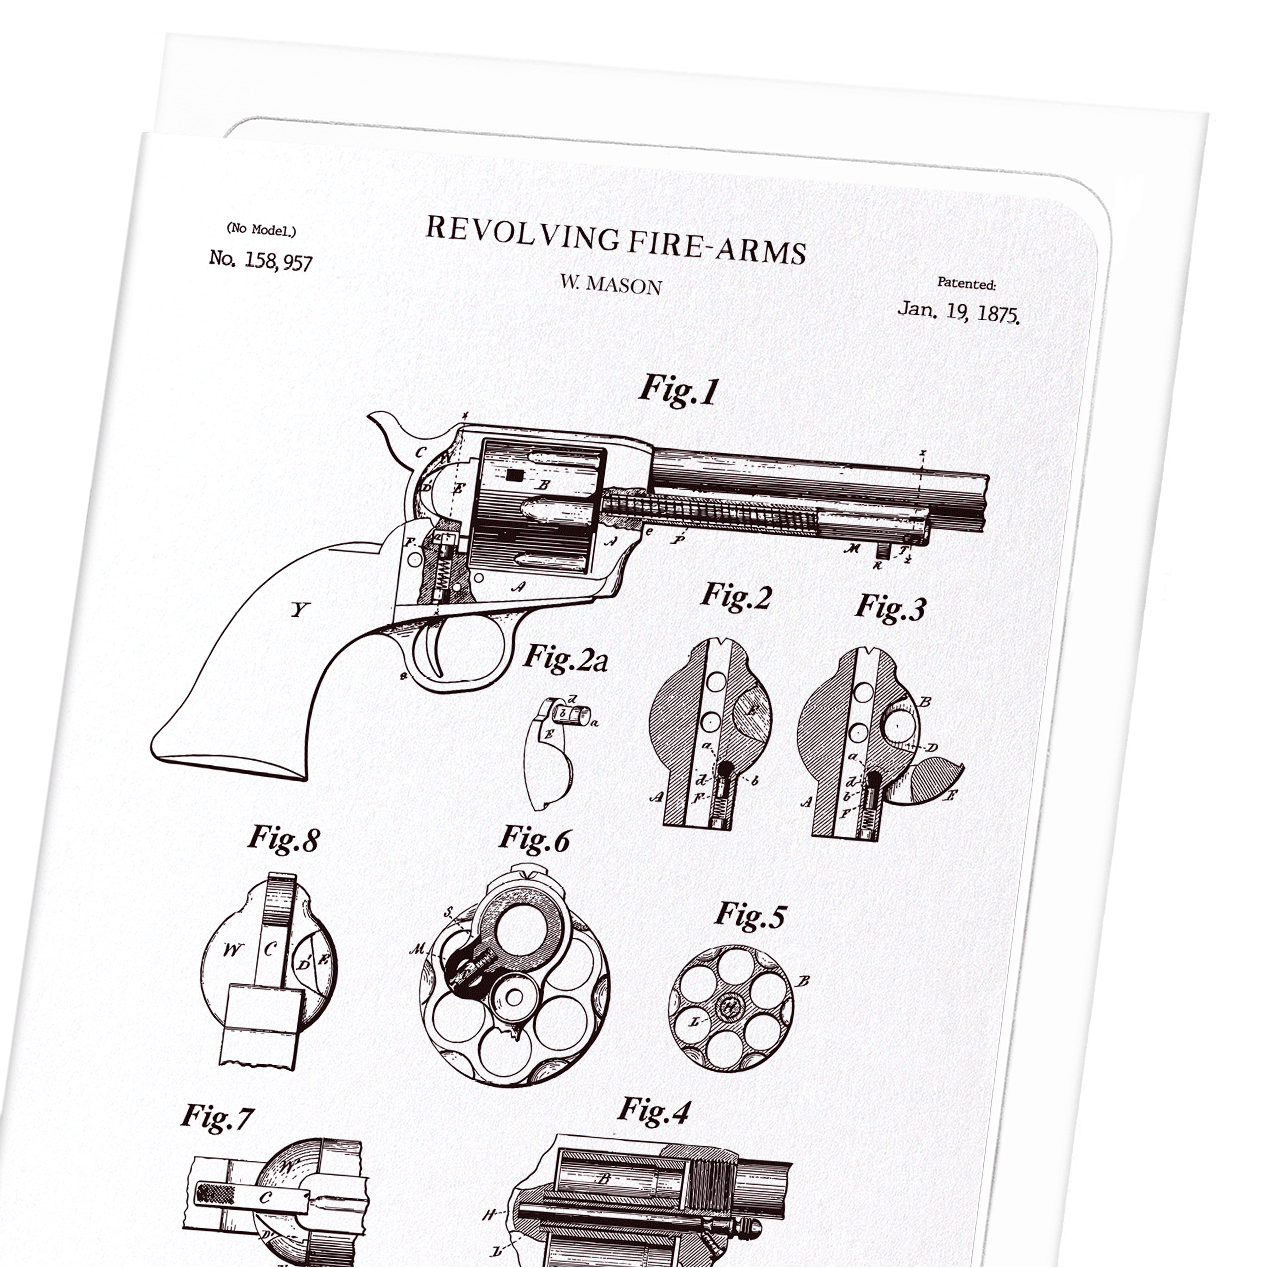 PATENT OF REVOLVING FIRE-ARMS (1875)